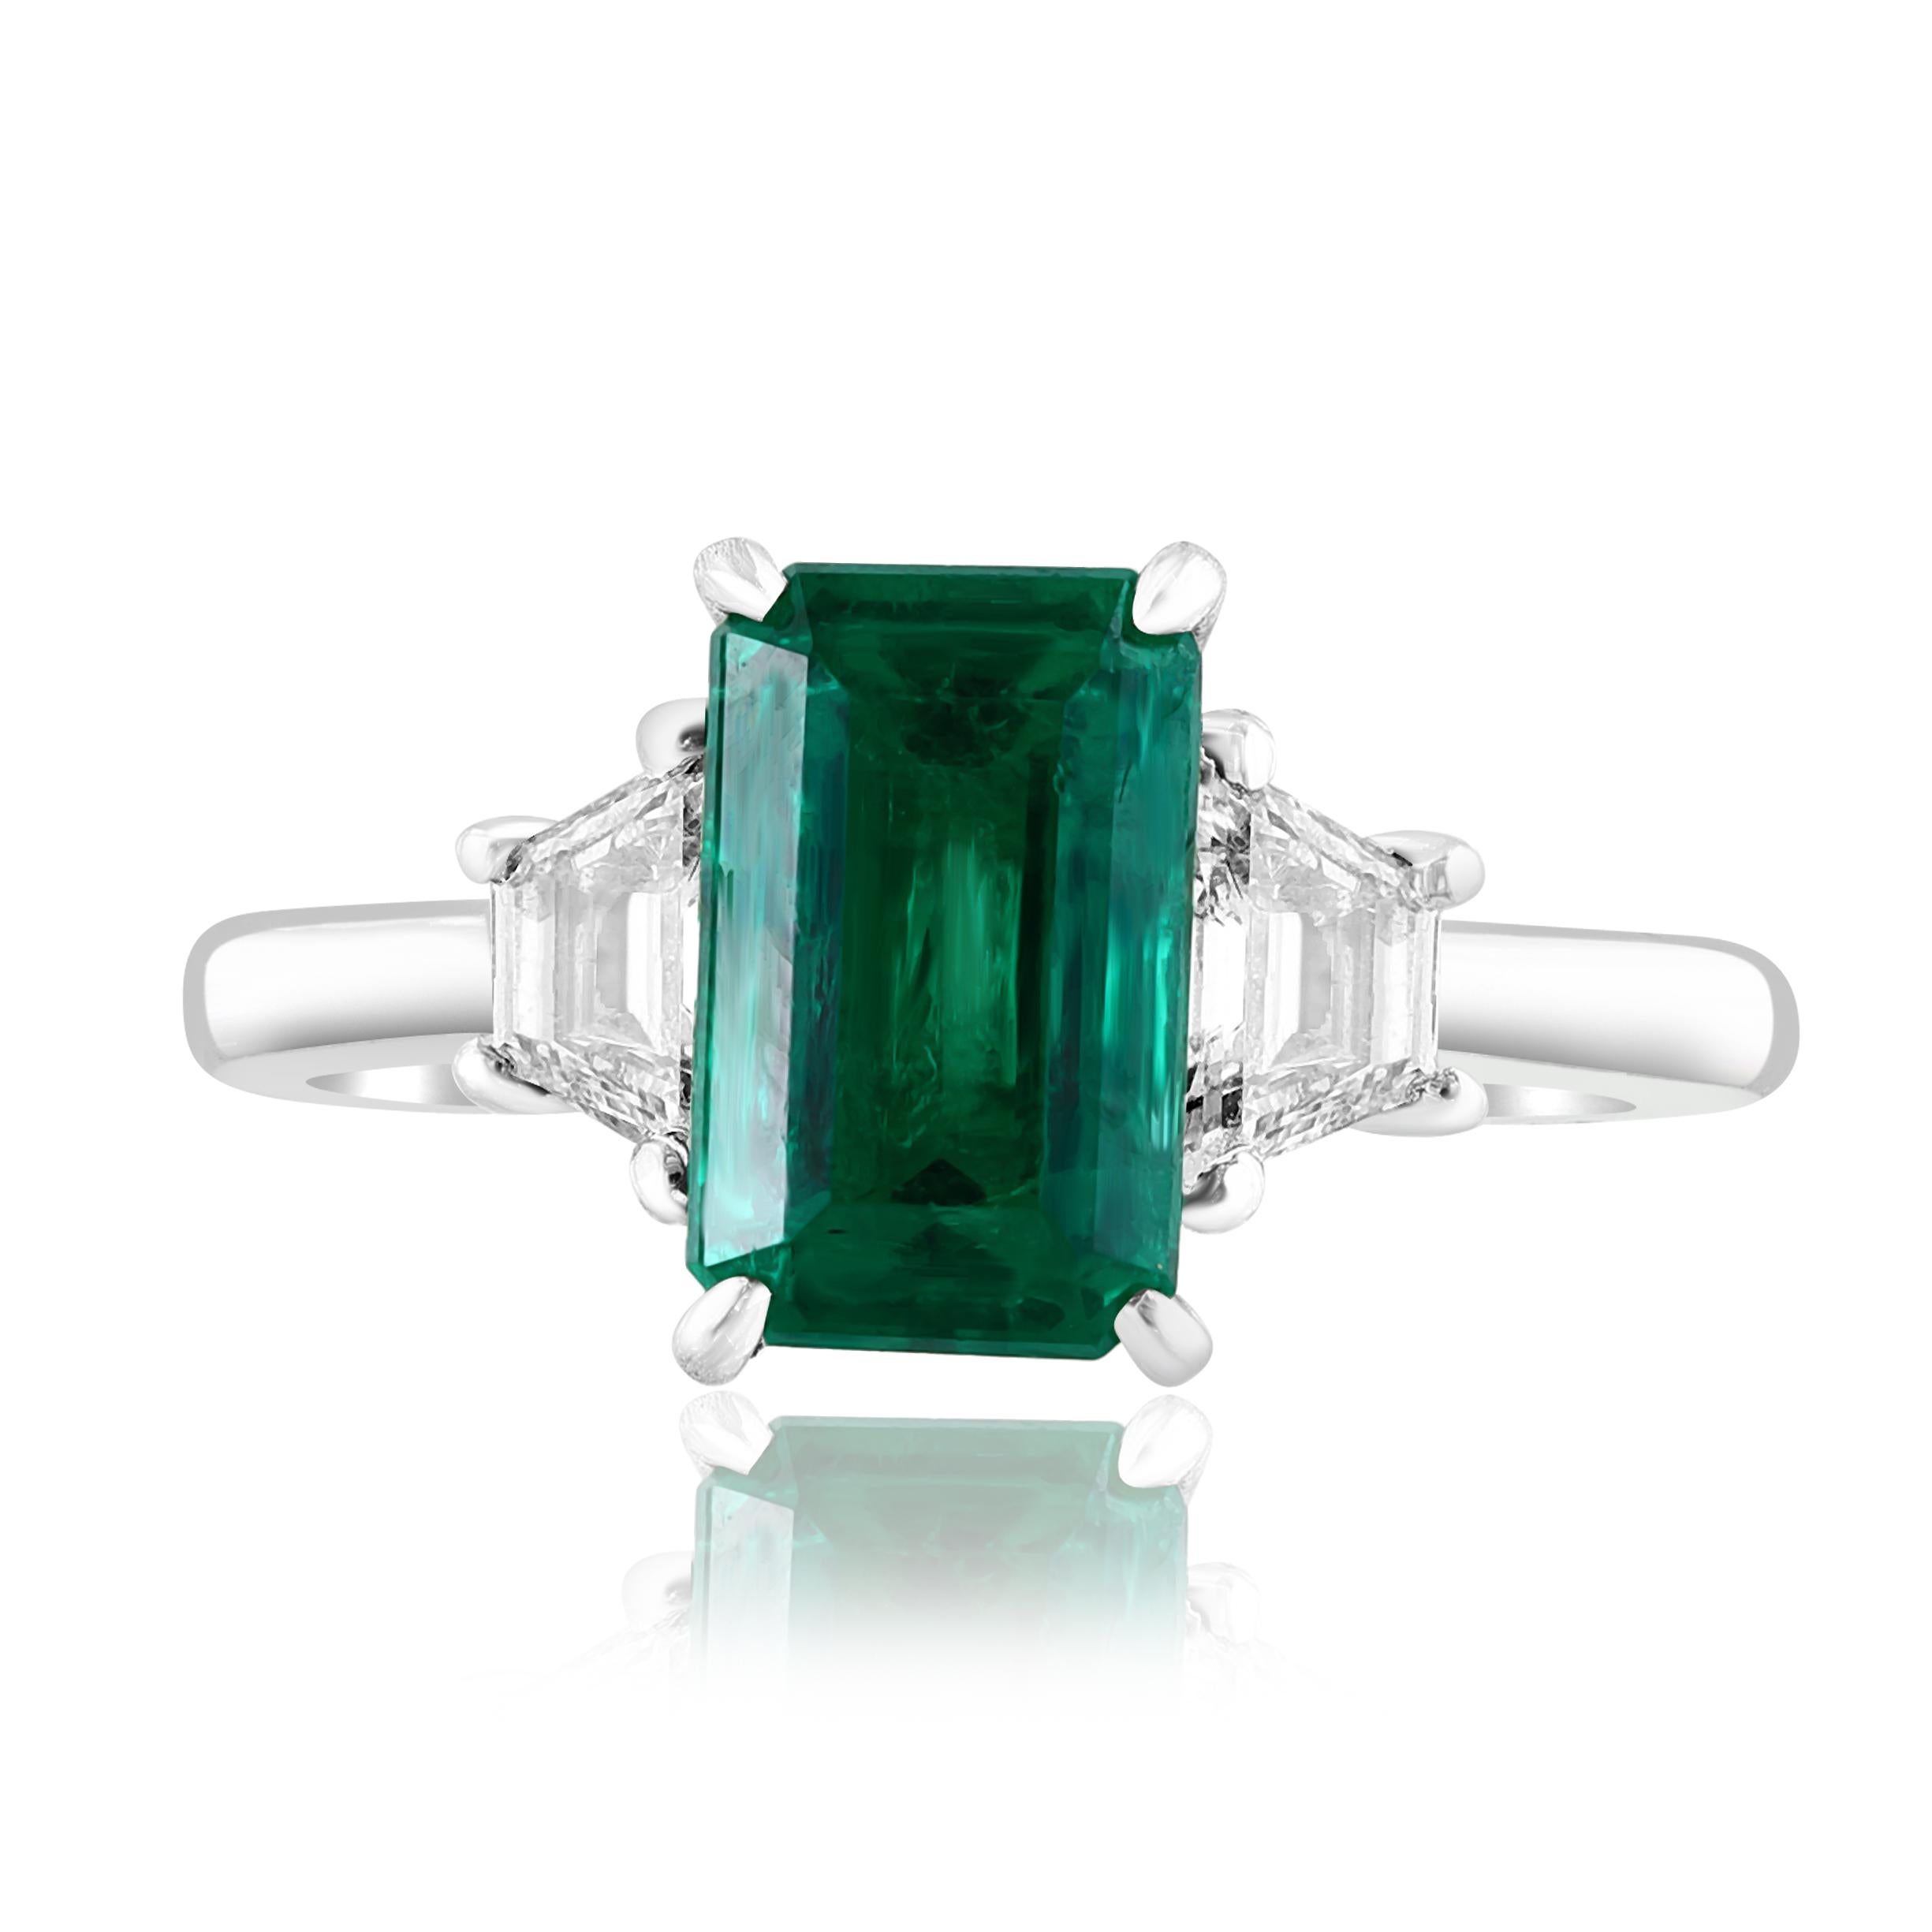 A stunning well-crafted engagement ring showcasing a 2.08-carat certified emerald-cut vivid green emerald from Colombia. Flanking the center diamond are perfectly matched 2-step cut trapezoid diamonds weighing 0.55 carat in total, set in a polished